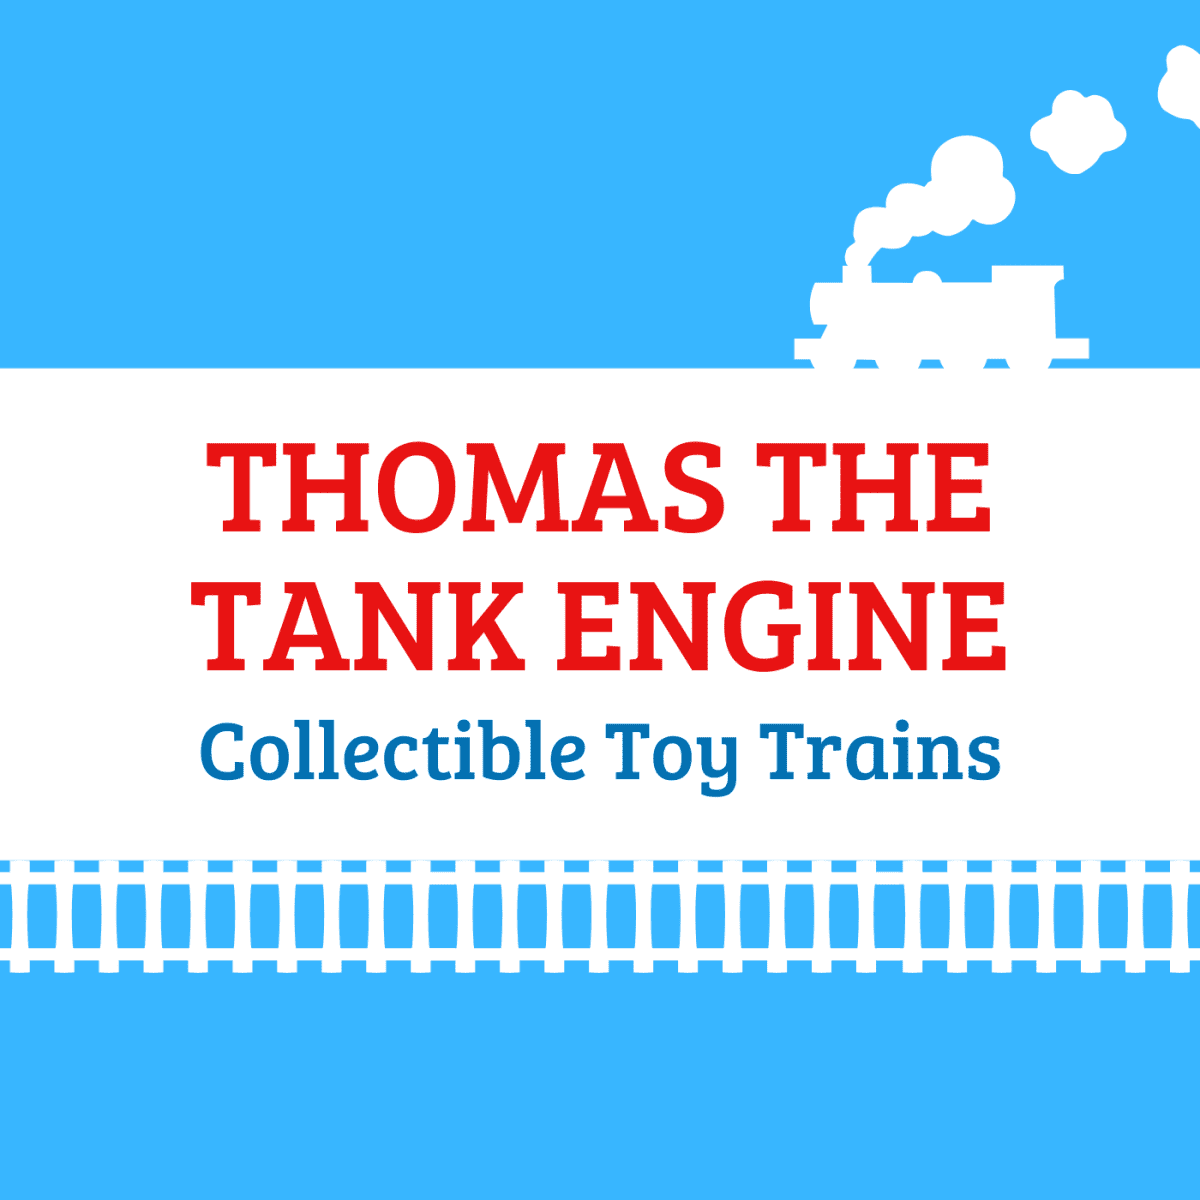 Thomas the Tank Engine Toy Trains: Guide for Collectors - HobbyLark